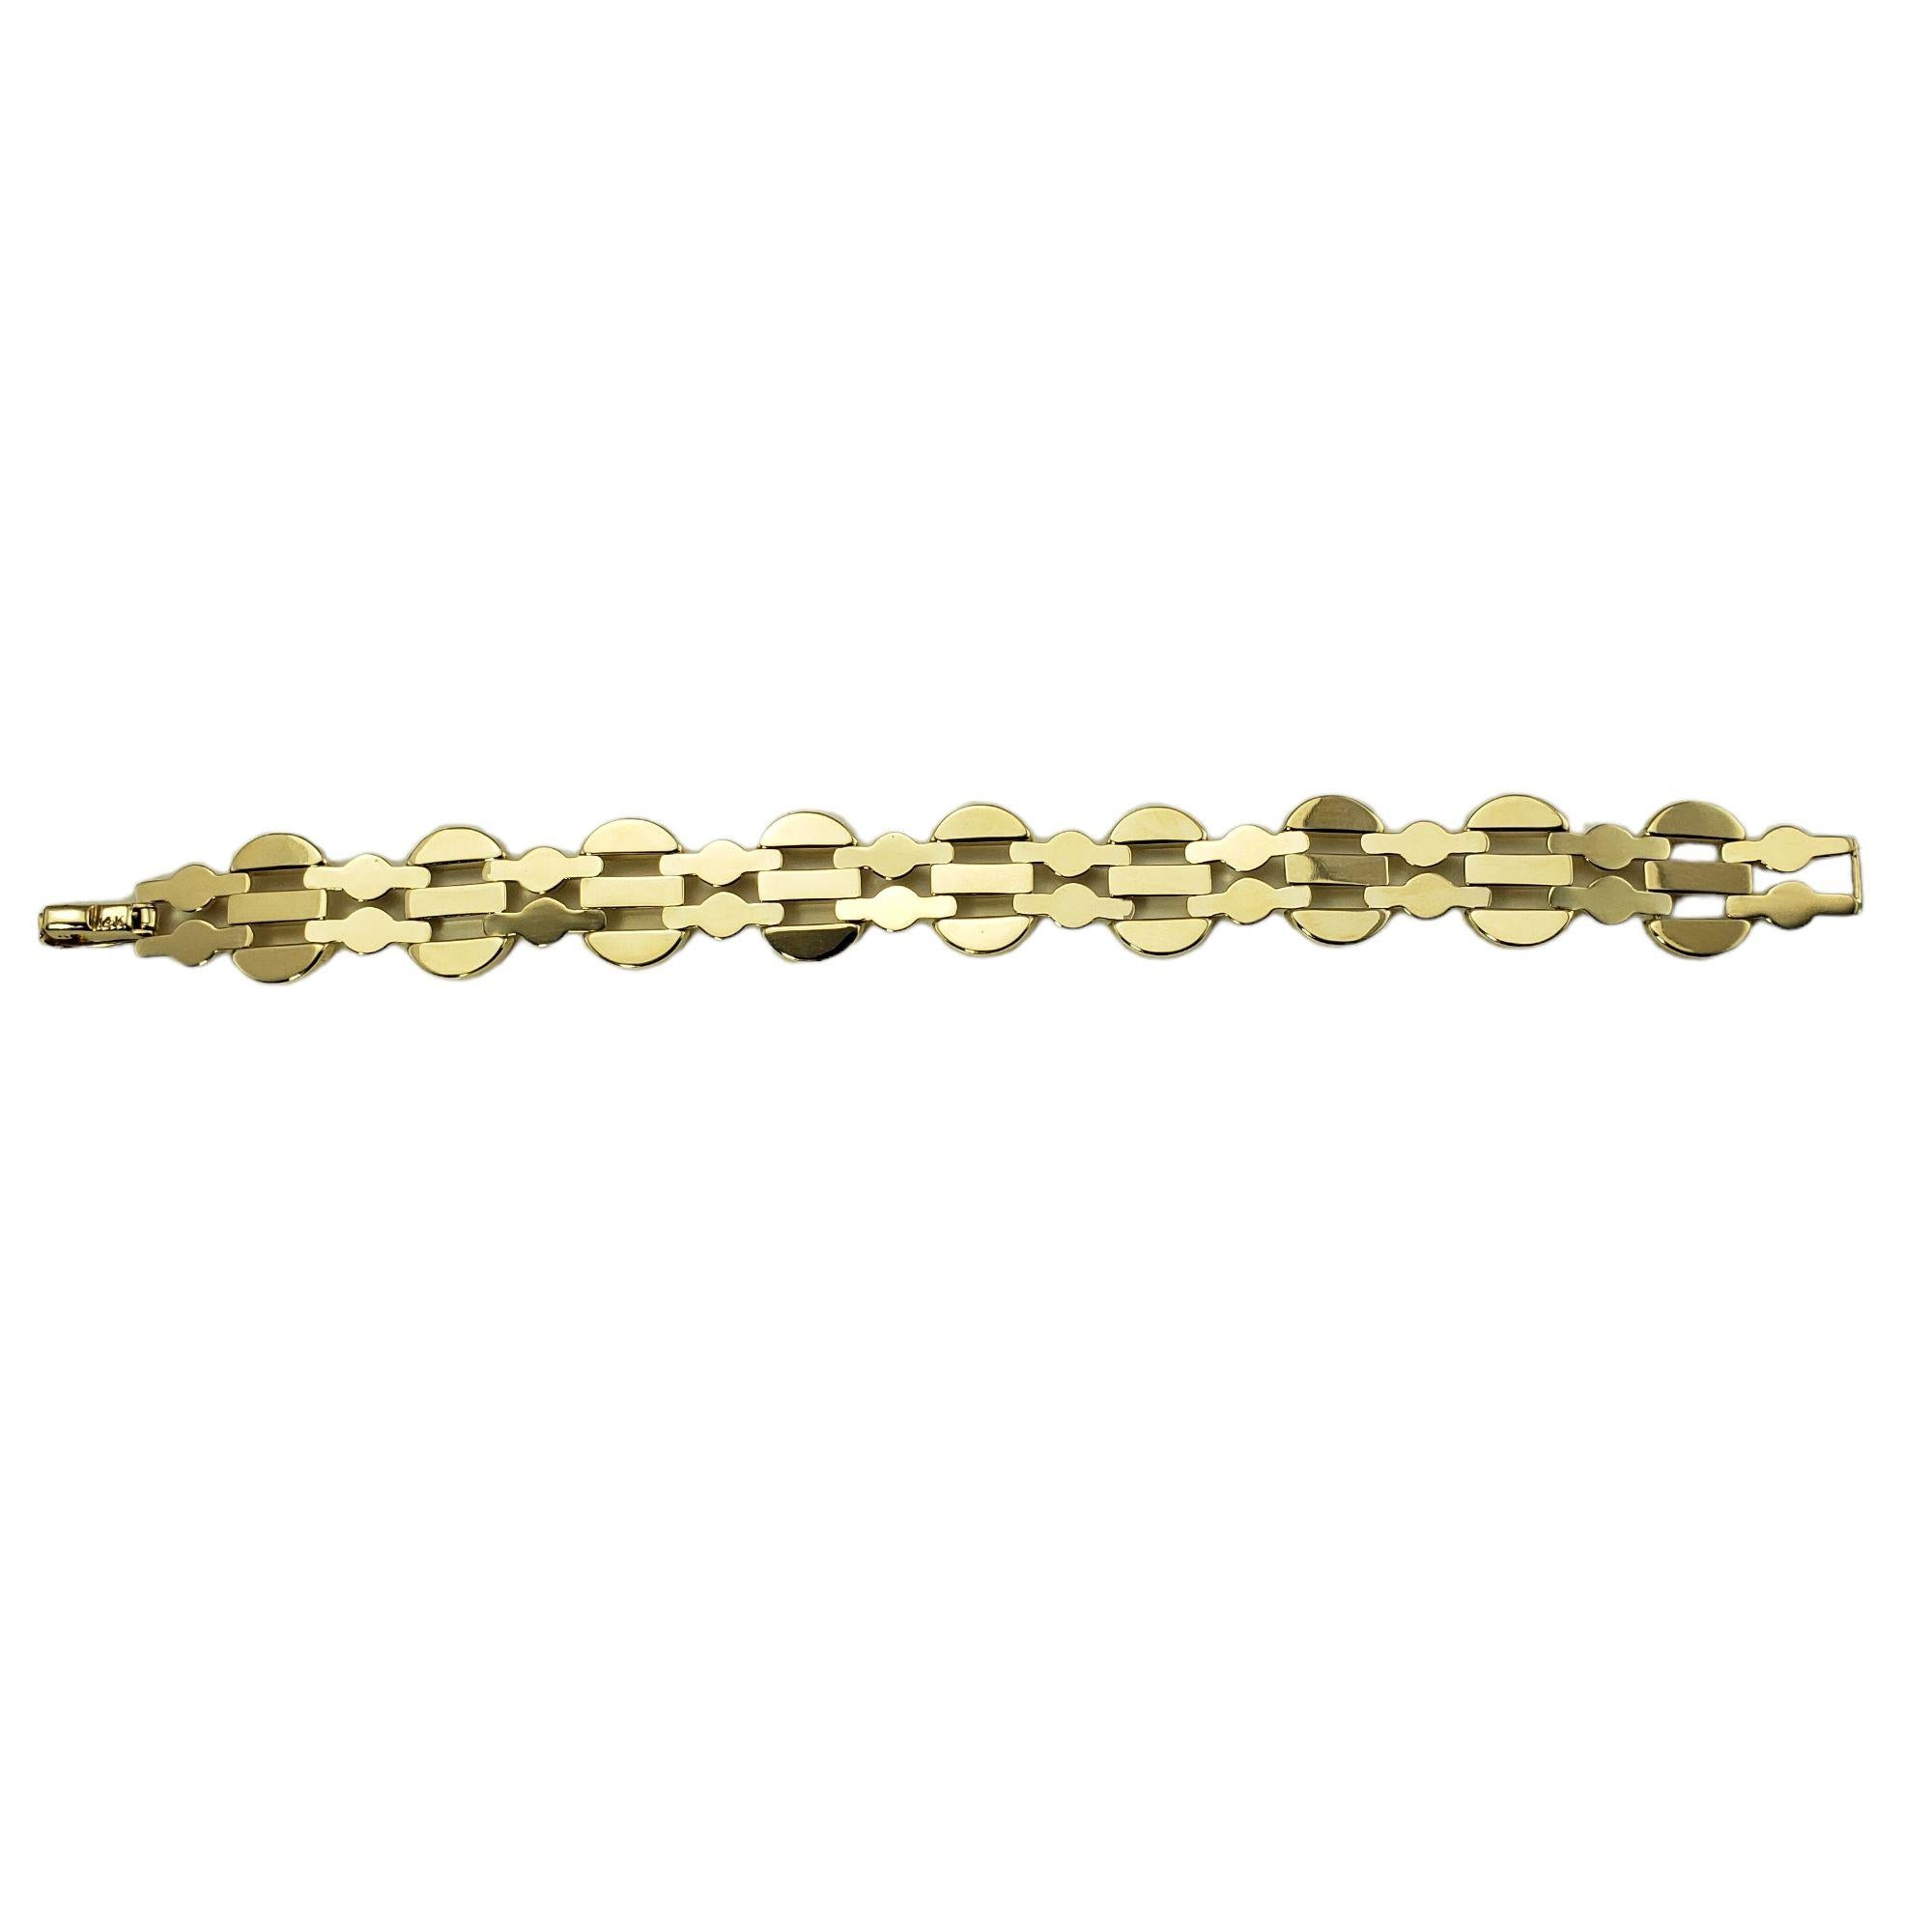 Vintage 14 Karat Yellow Gold Link Bracelet-

This lovely bracelet is crafted in beautifully detailed 14K yellow gold. Width: 8 mm.

Size: 7 inches

Weight: 9.8 dwt. / 15.3 gr.

Stamped: 14K

Very good condition, professionally polished.

Will come